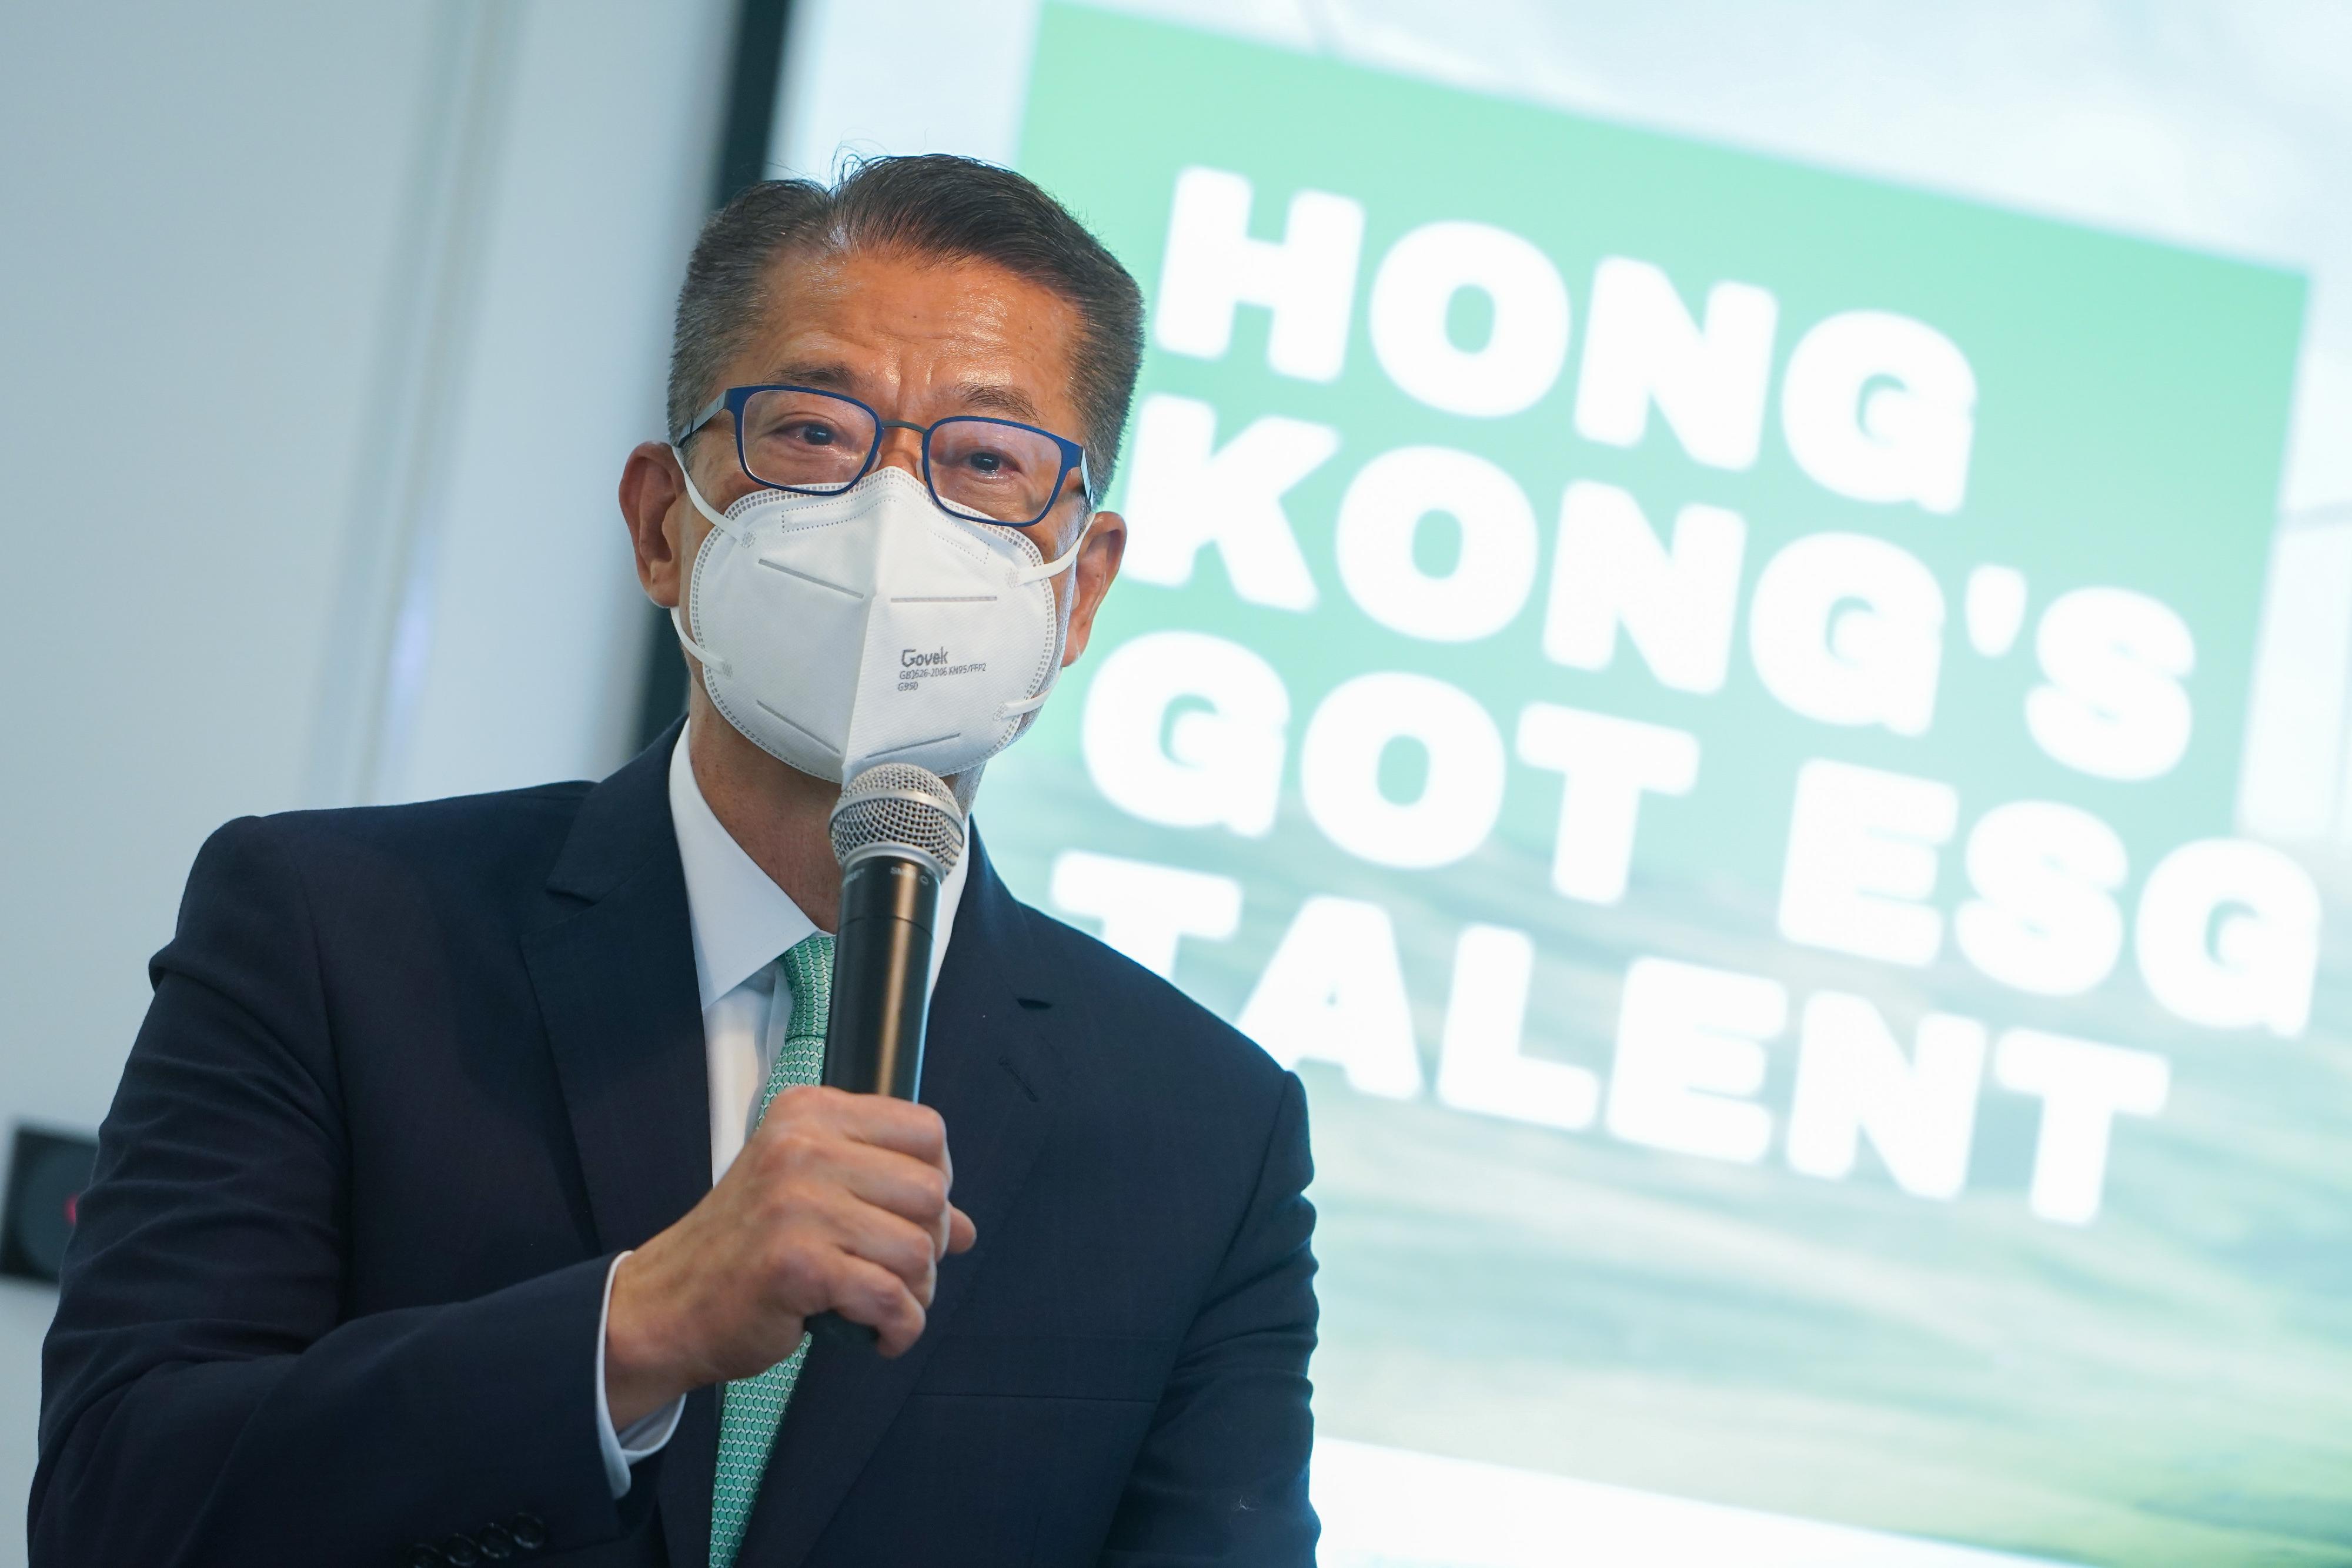 The Financial Secretary, Mr Paul Chan, speaks at the European Chamber of Commerce in Hong Kong Sustainable Finance Working Group Launch Event today (September 19).